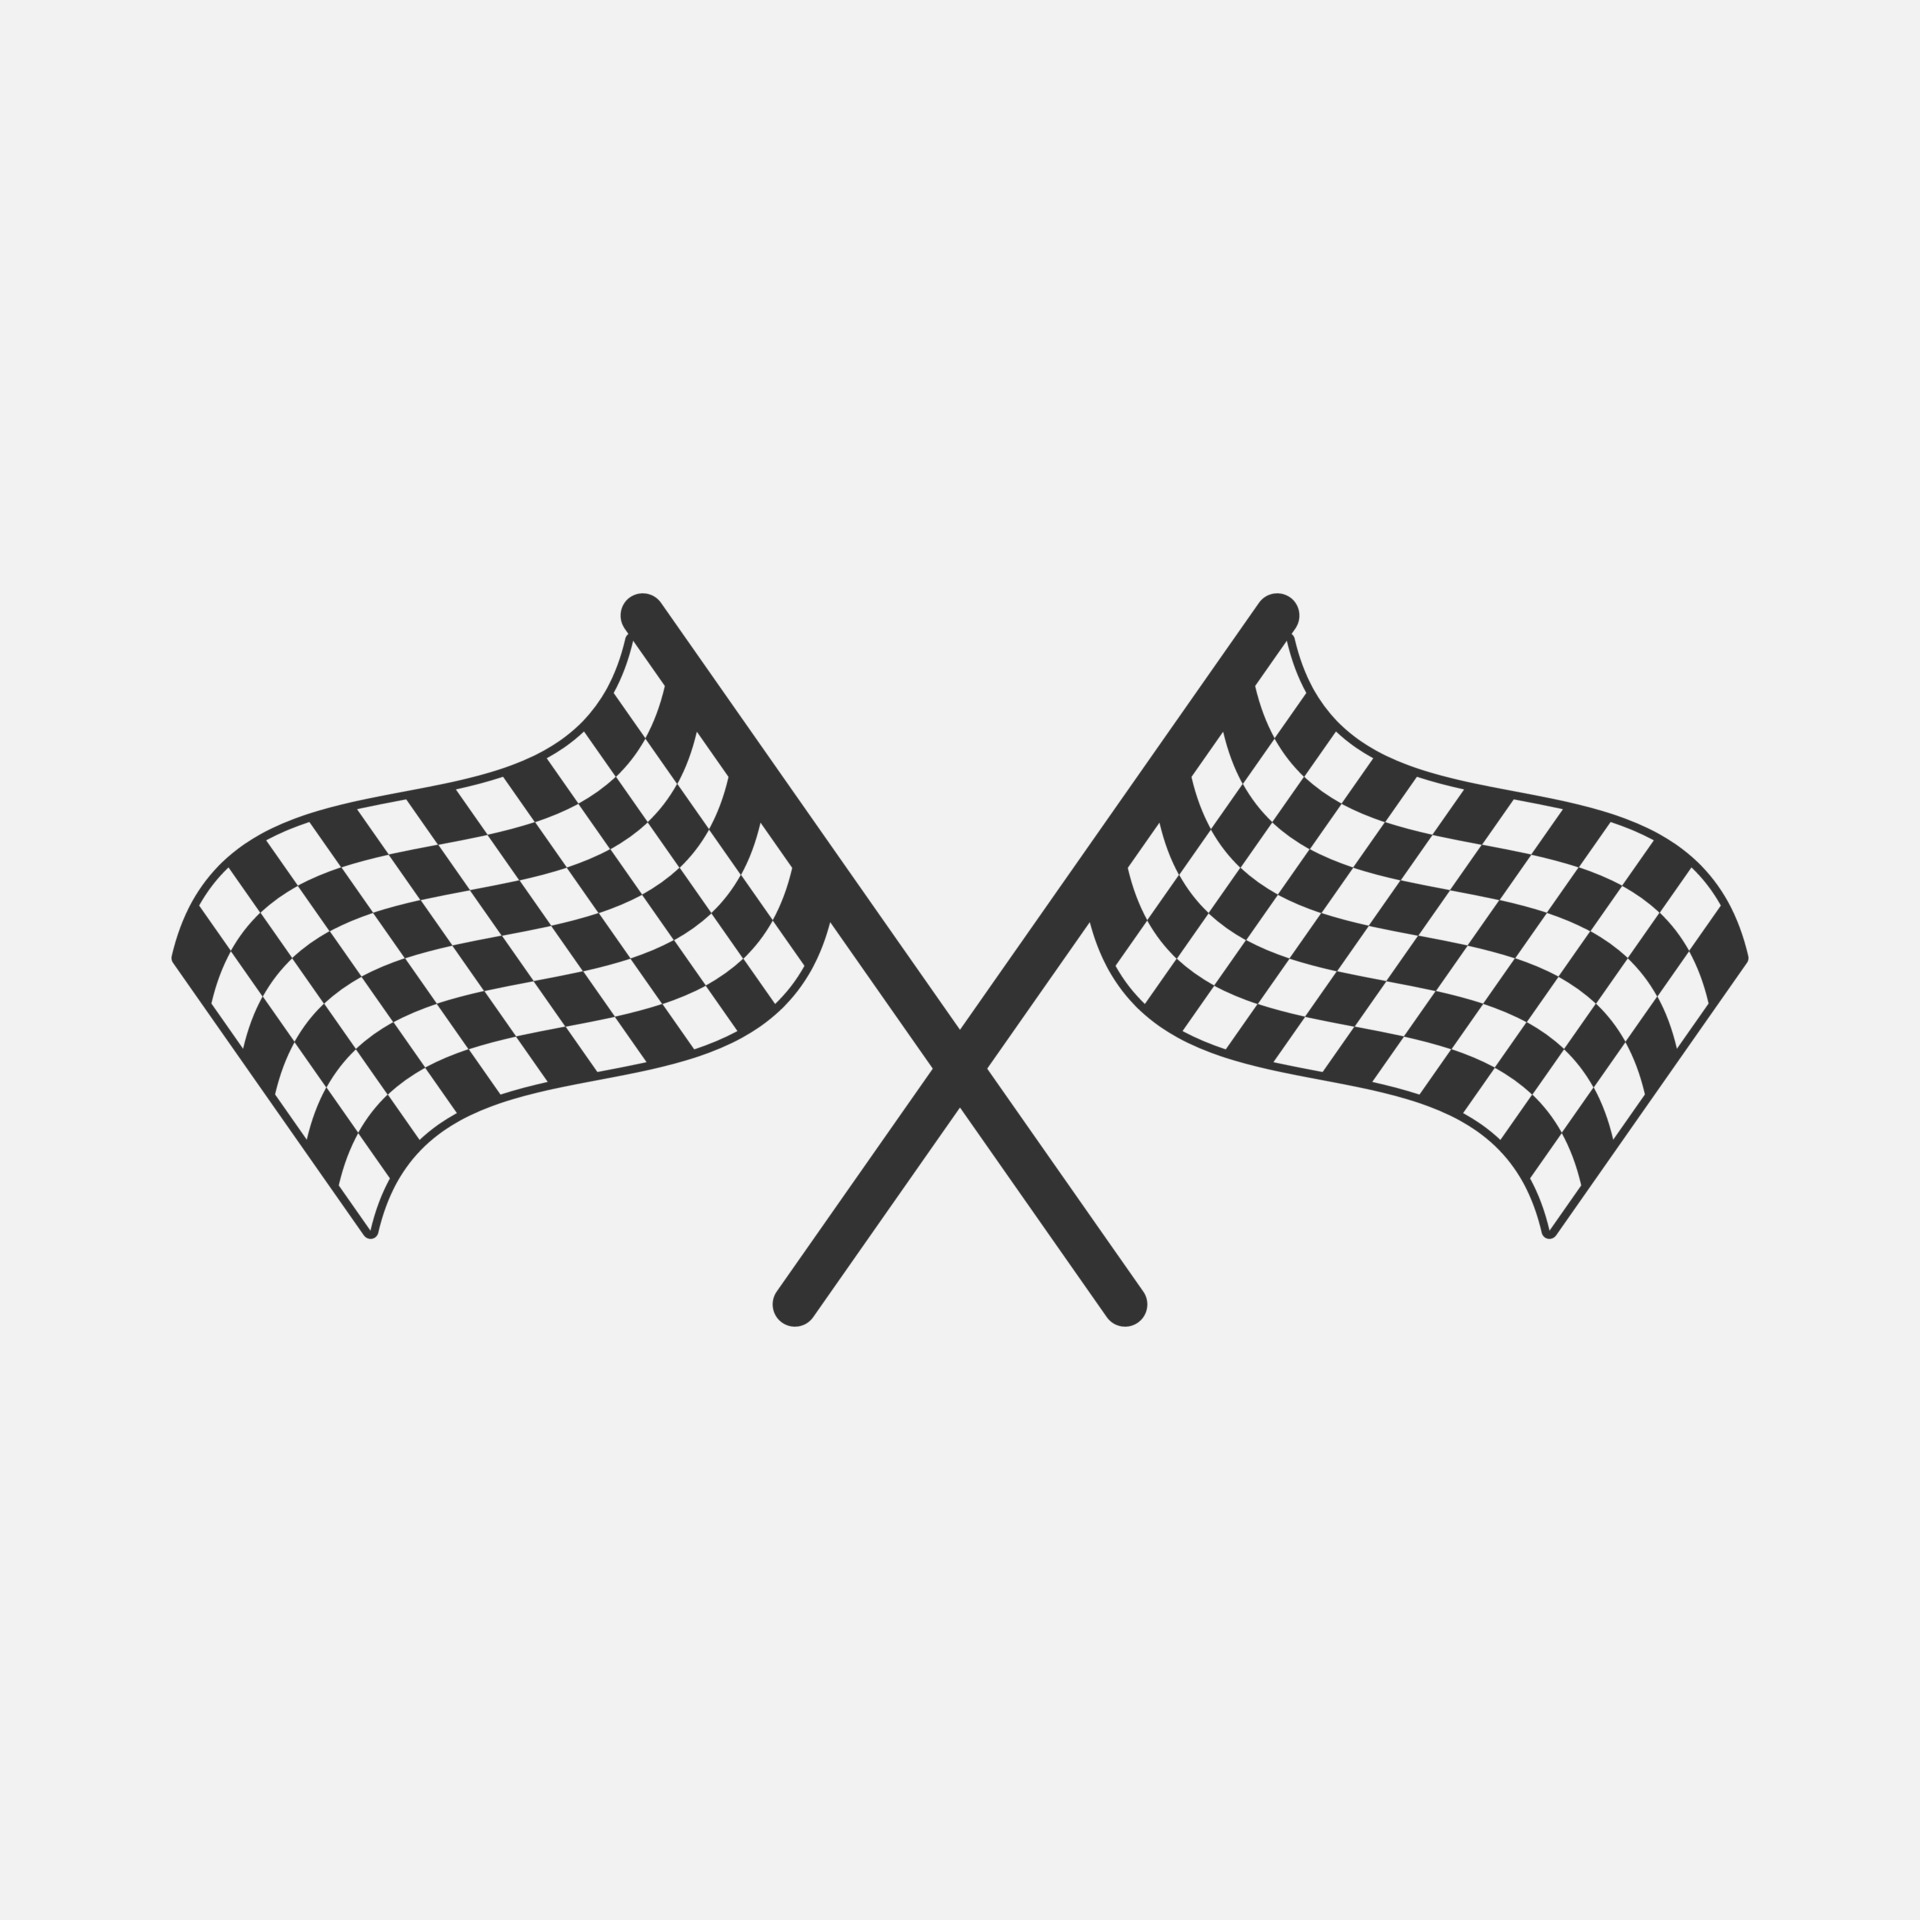 Two Crossed Checkered Racing Flags Vector Icon Isolated On White